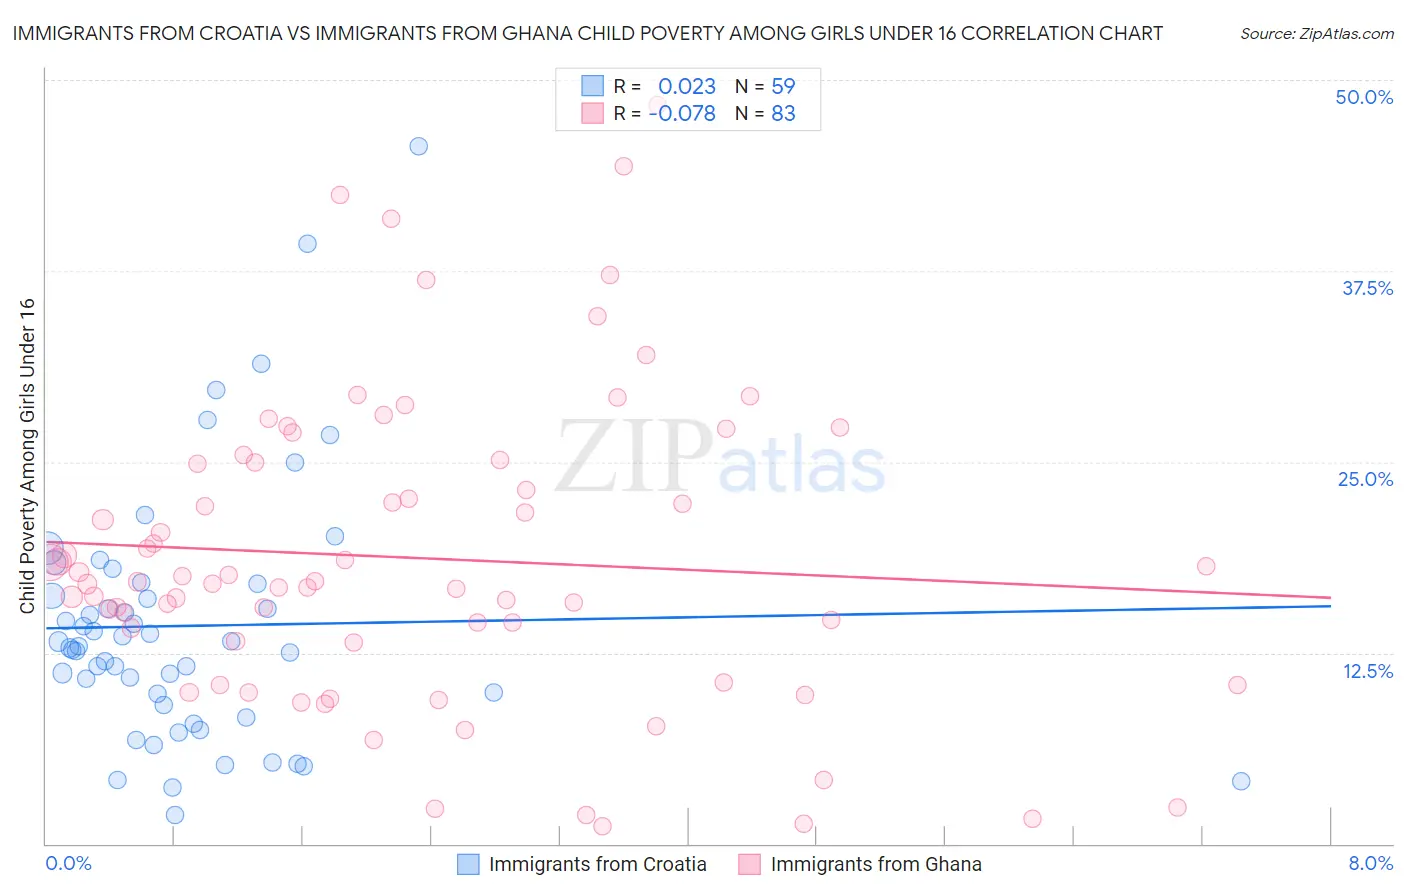 Immigrants from Croatia vs Immigrants from Ghana Child Poverty Among Girls Under 16